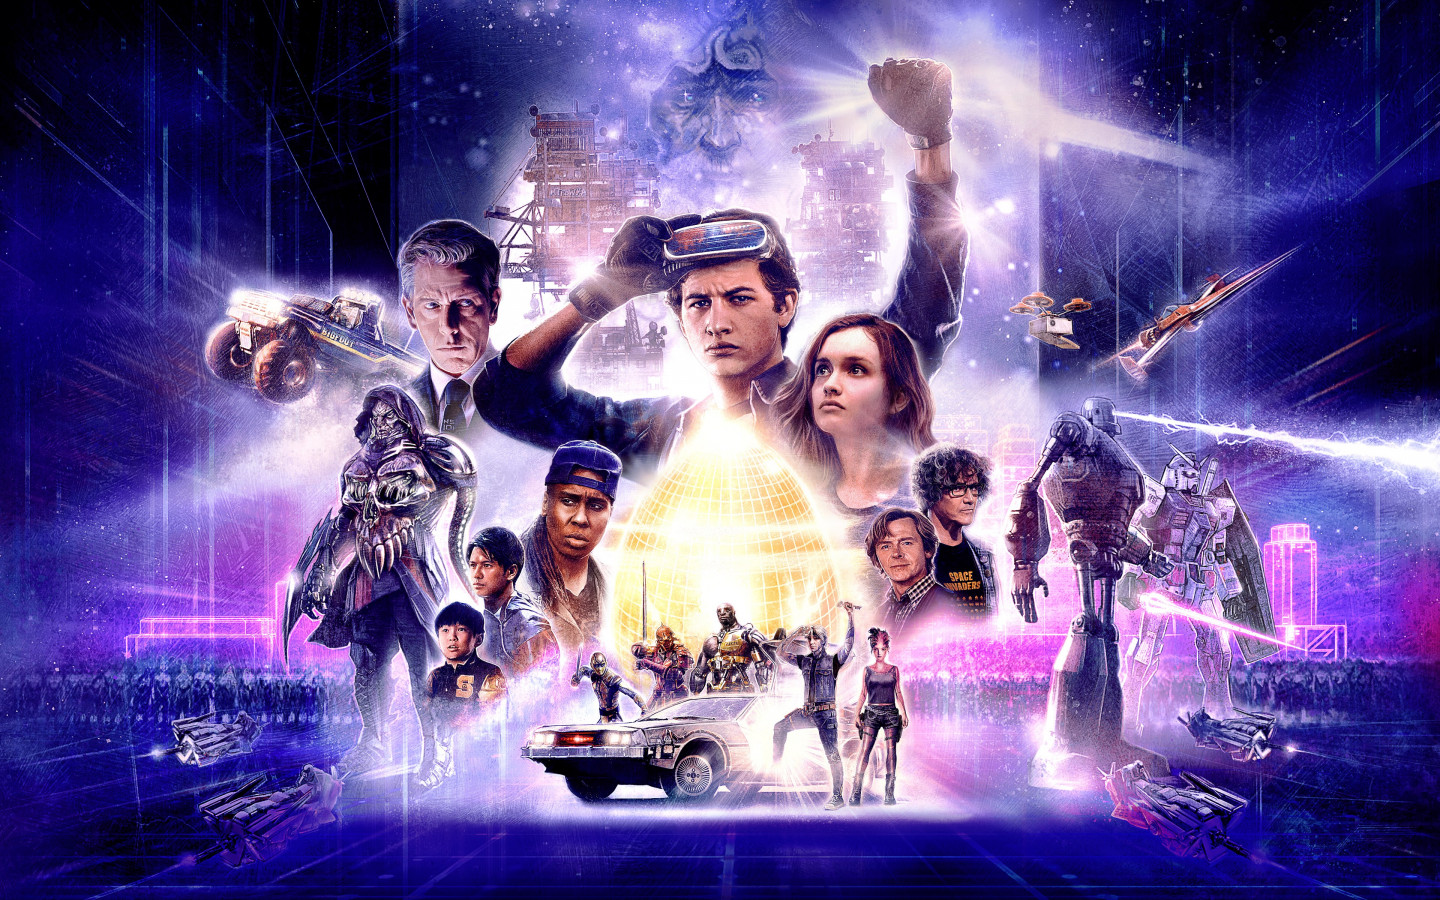 Ready Player One poster wallpaper 1440x900